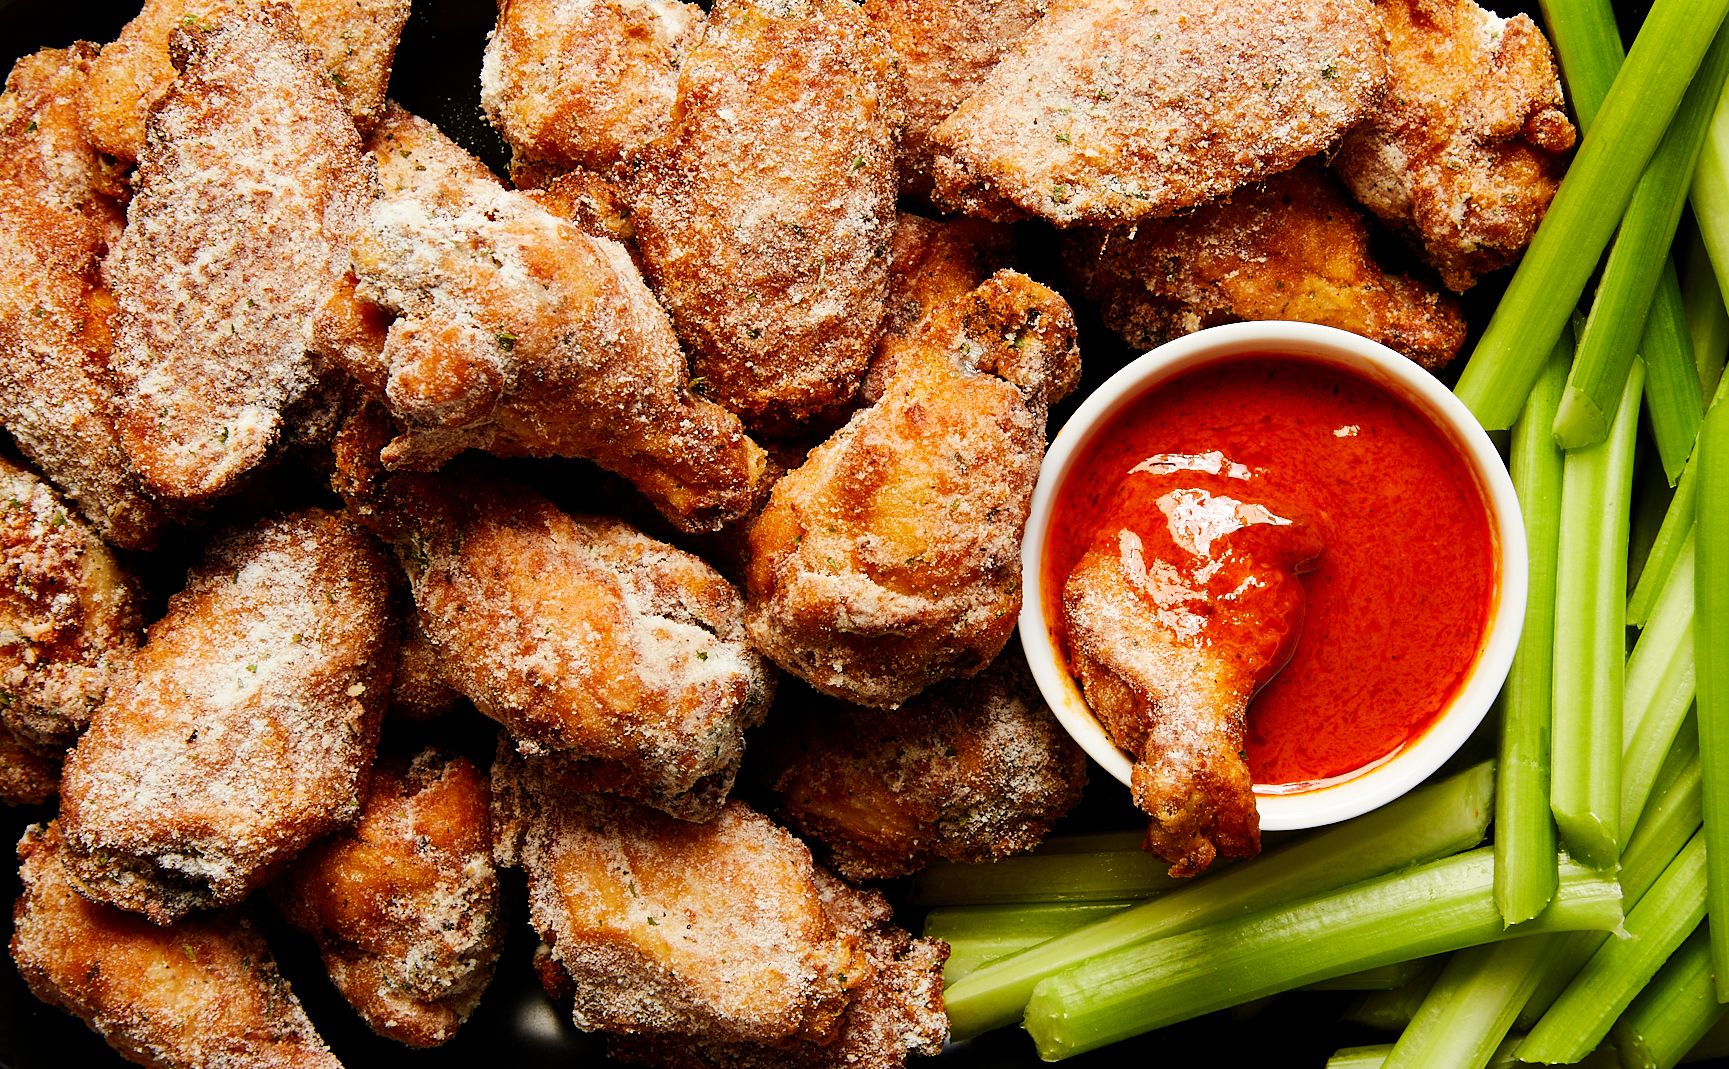 30 Best Chicken Wing Recipes - How to Make Homemade Chicken Wings